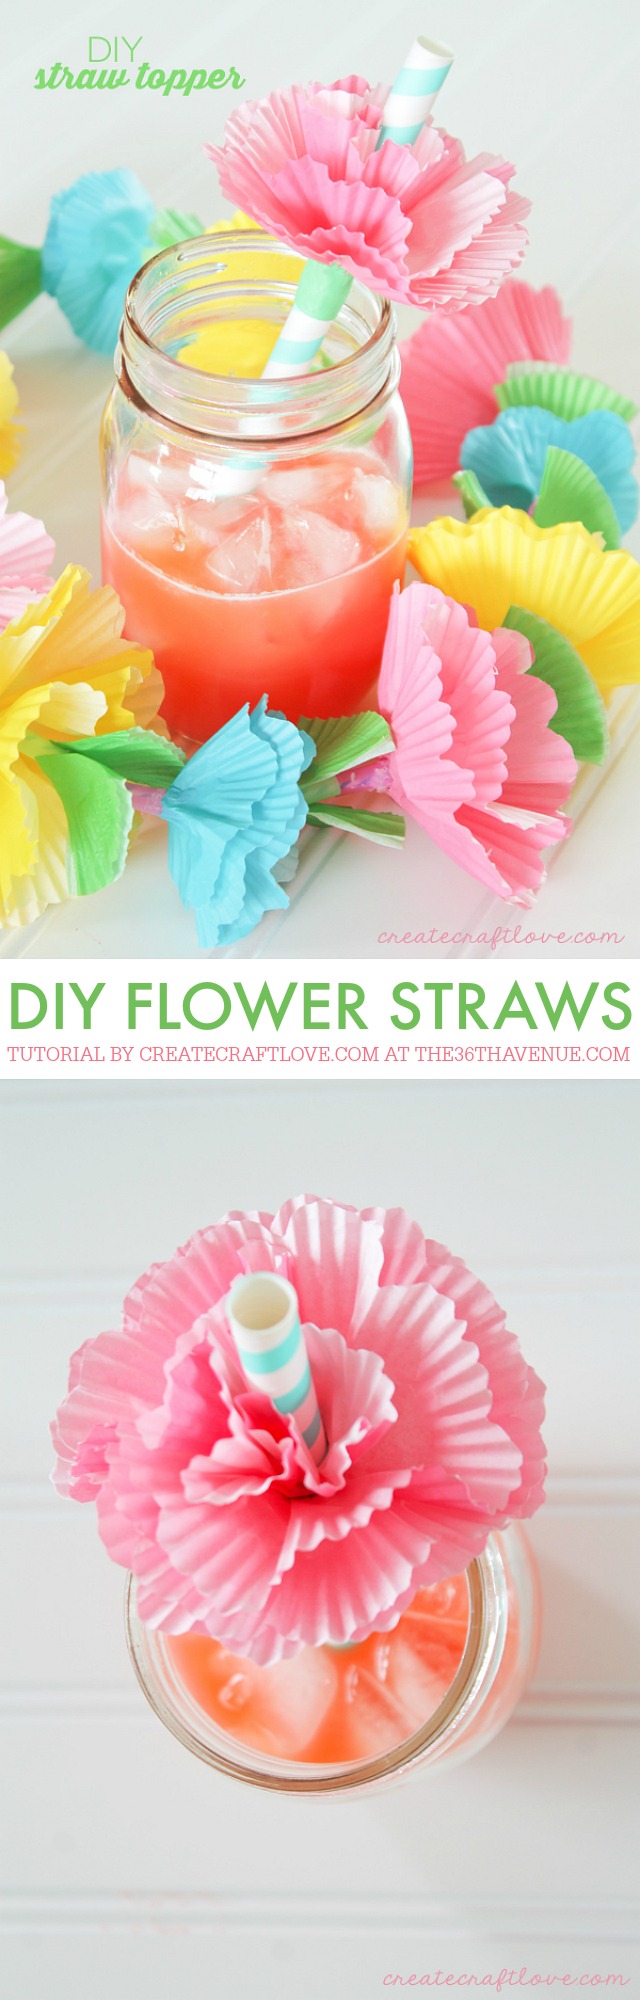 Crafts – DIY Straw Toppers